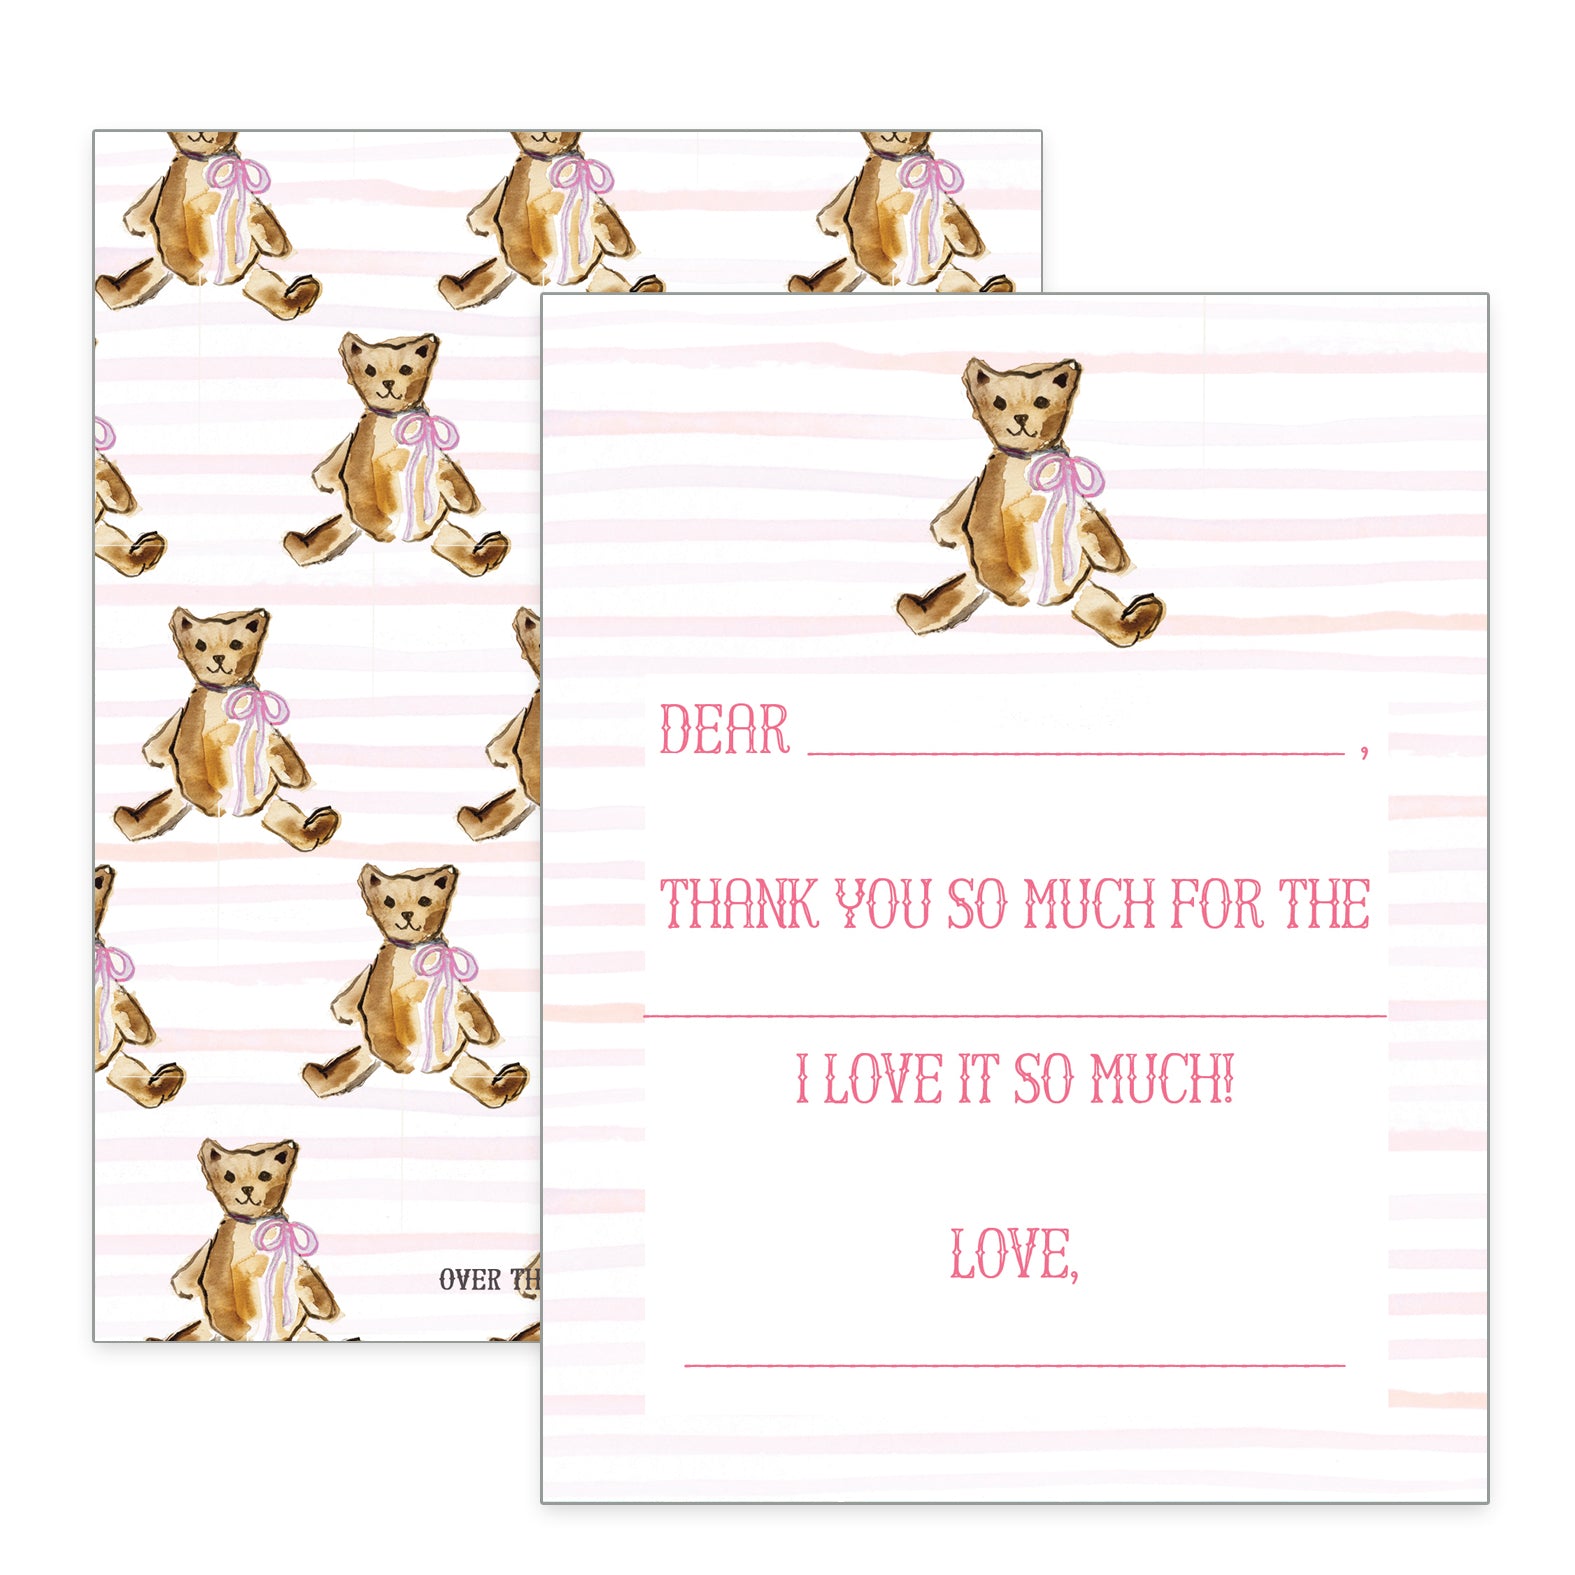 Children's Teddy Bear with Pink Bow Thank You Notecards